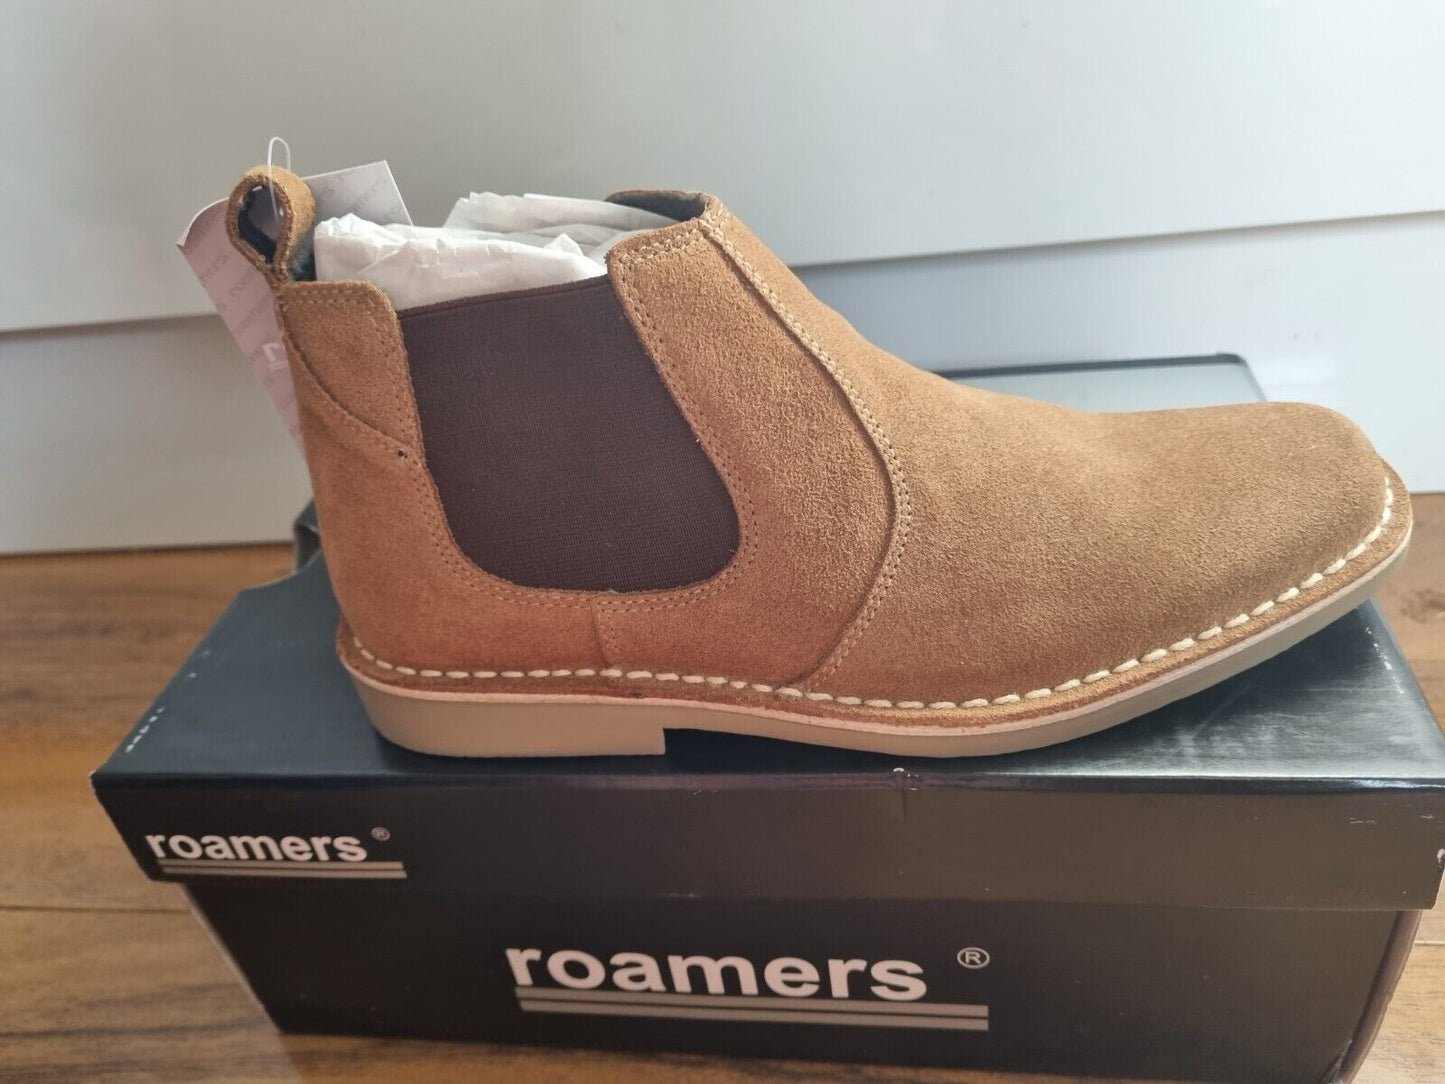 Desert Boot by Roamers - Chelsea - Taupe Suede Leather (M765BS)